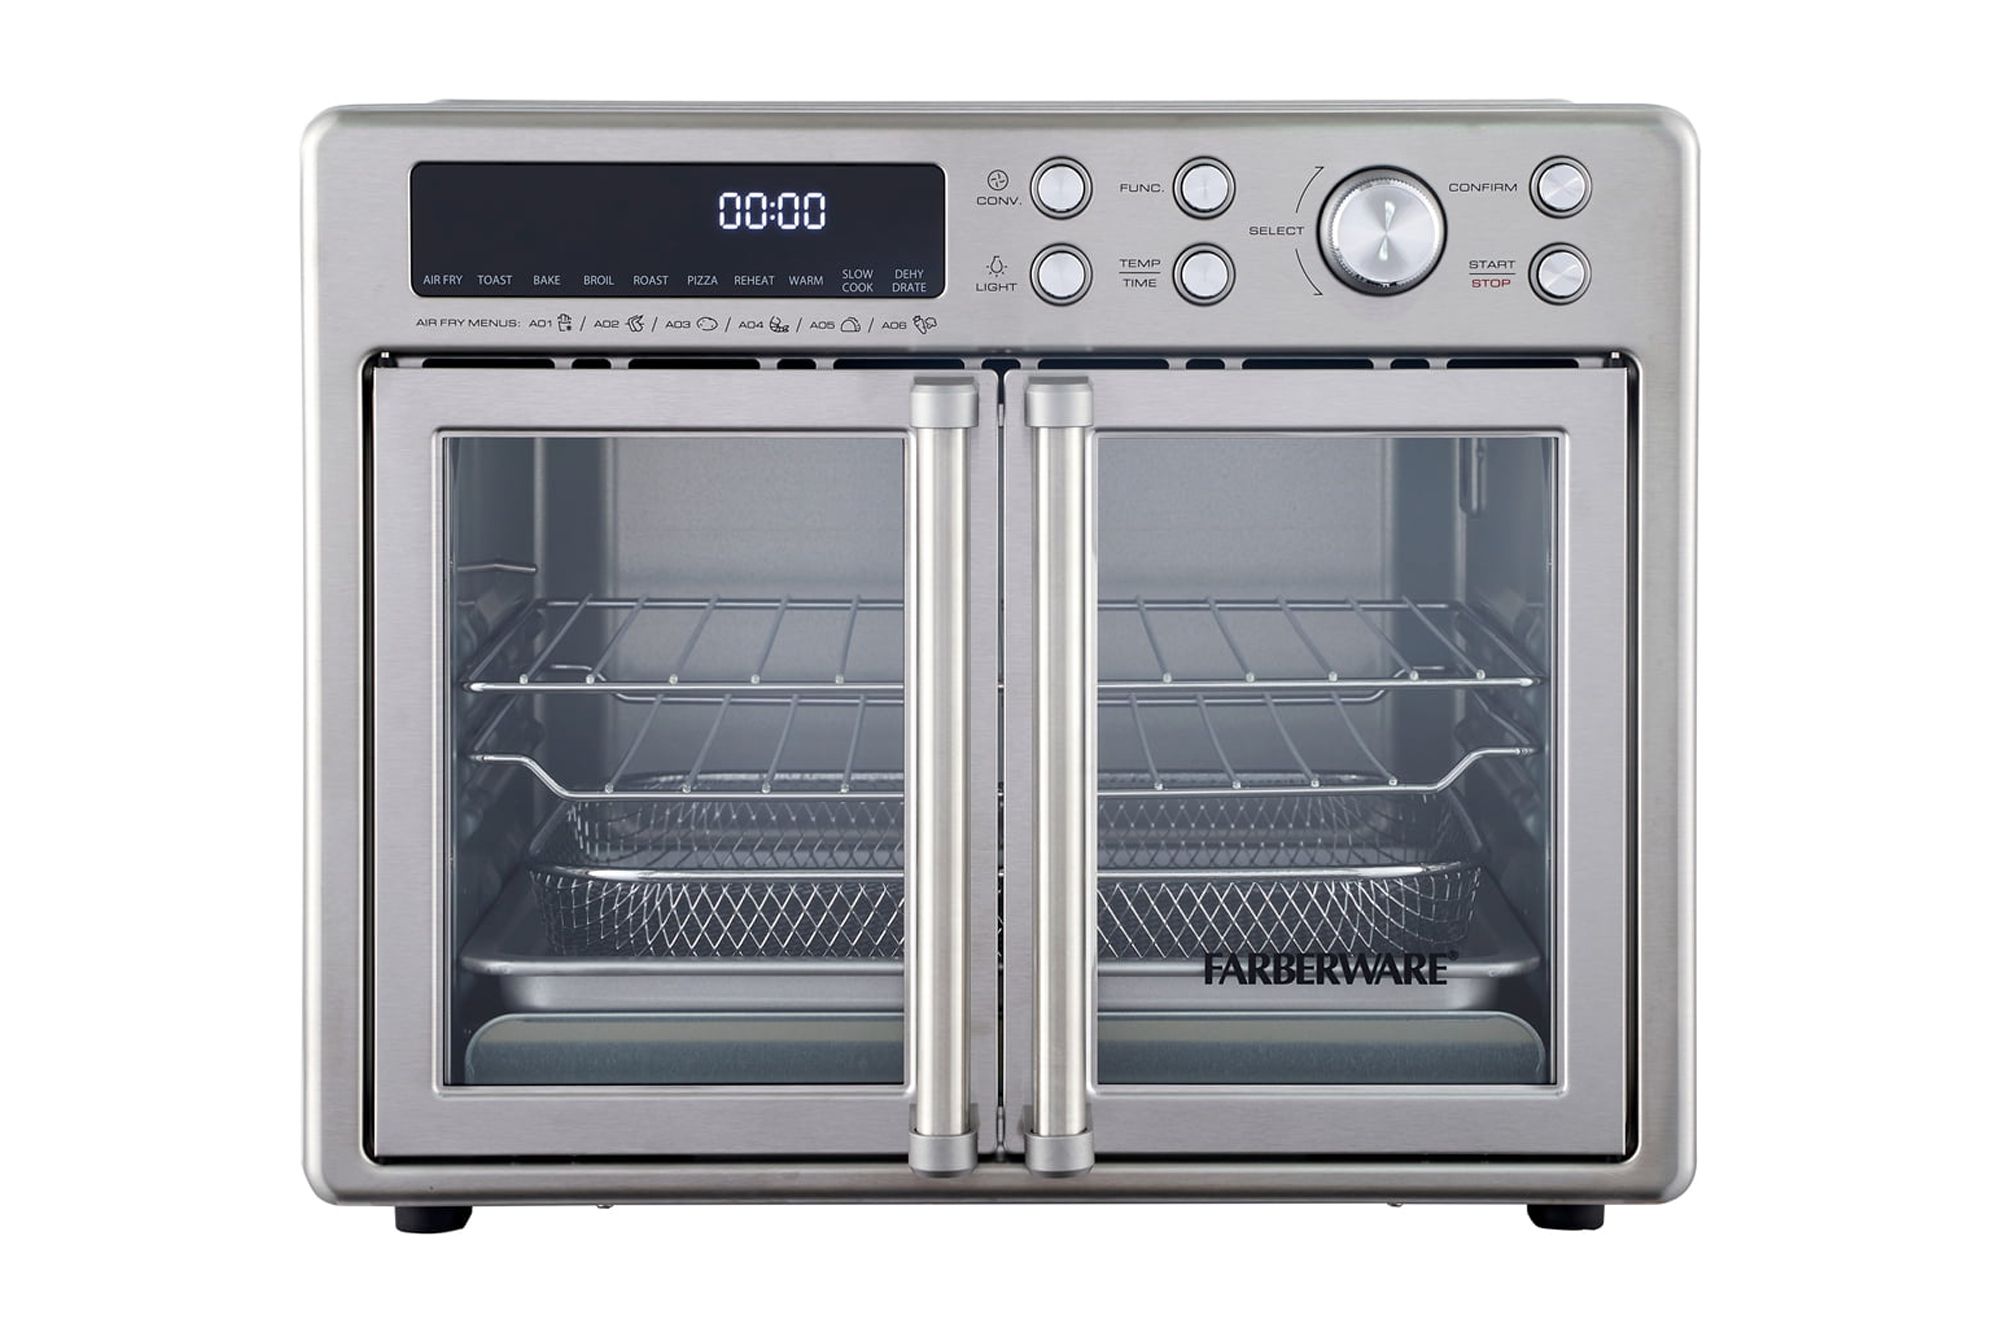 Farberware Brand 25L 6-Slice Toaster Oven with Air Fry, French Door, FW12-100024316 - image 1 of 5